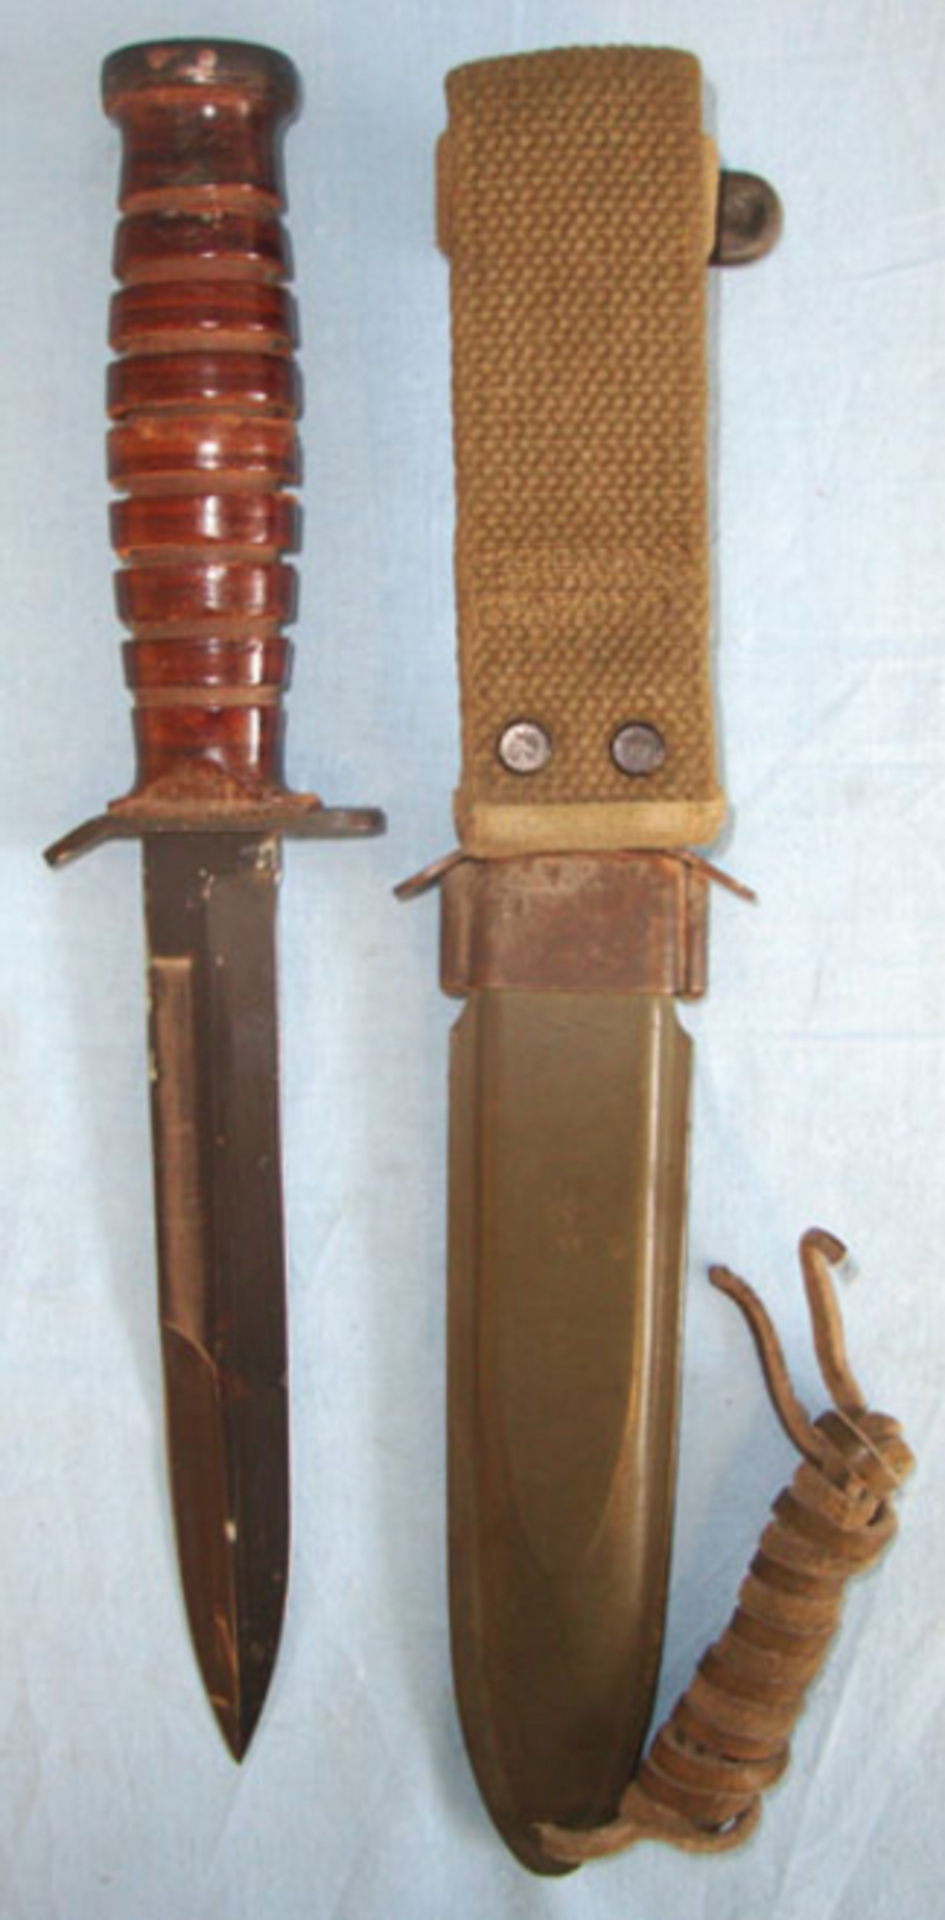 MINT, UN-ISSUED WW2 US Blade Marked M3 Fighting Knife By Camillus & 1st Pattern M8 Scabbard - Image 2 of 3